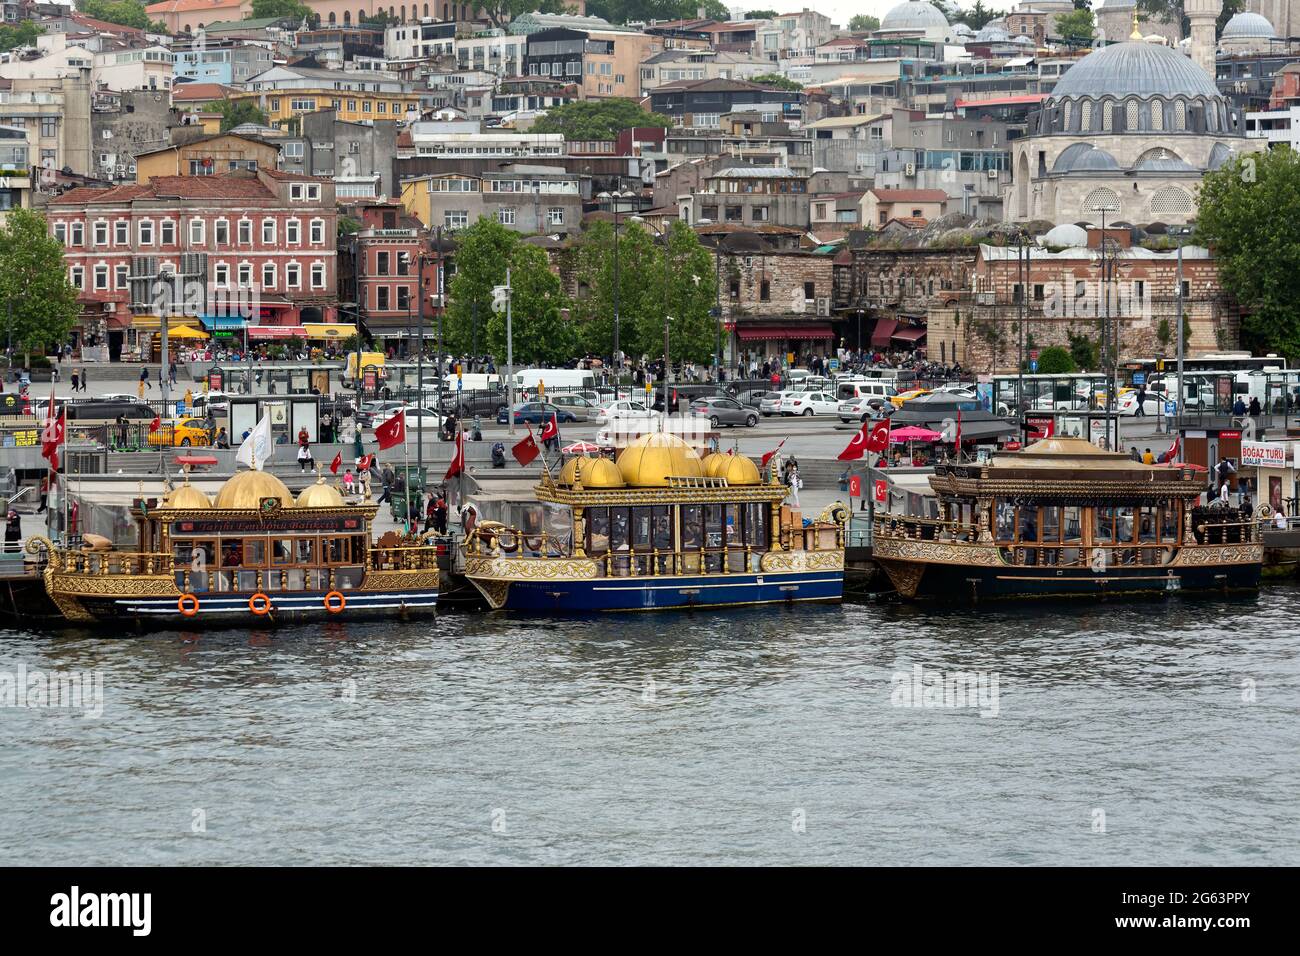 Fish and chips, seafood takeaway street food. Floating restaurant boats with oriental and Ottoman theme in Eminonu, Istanbul, Turkey. Stock Photo